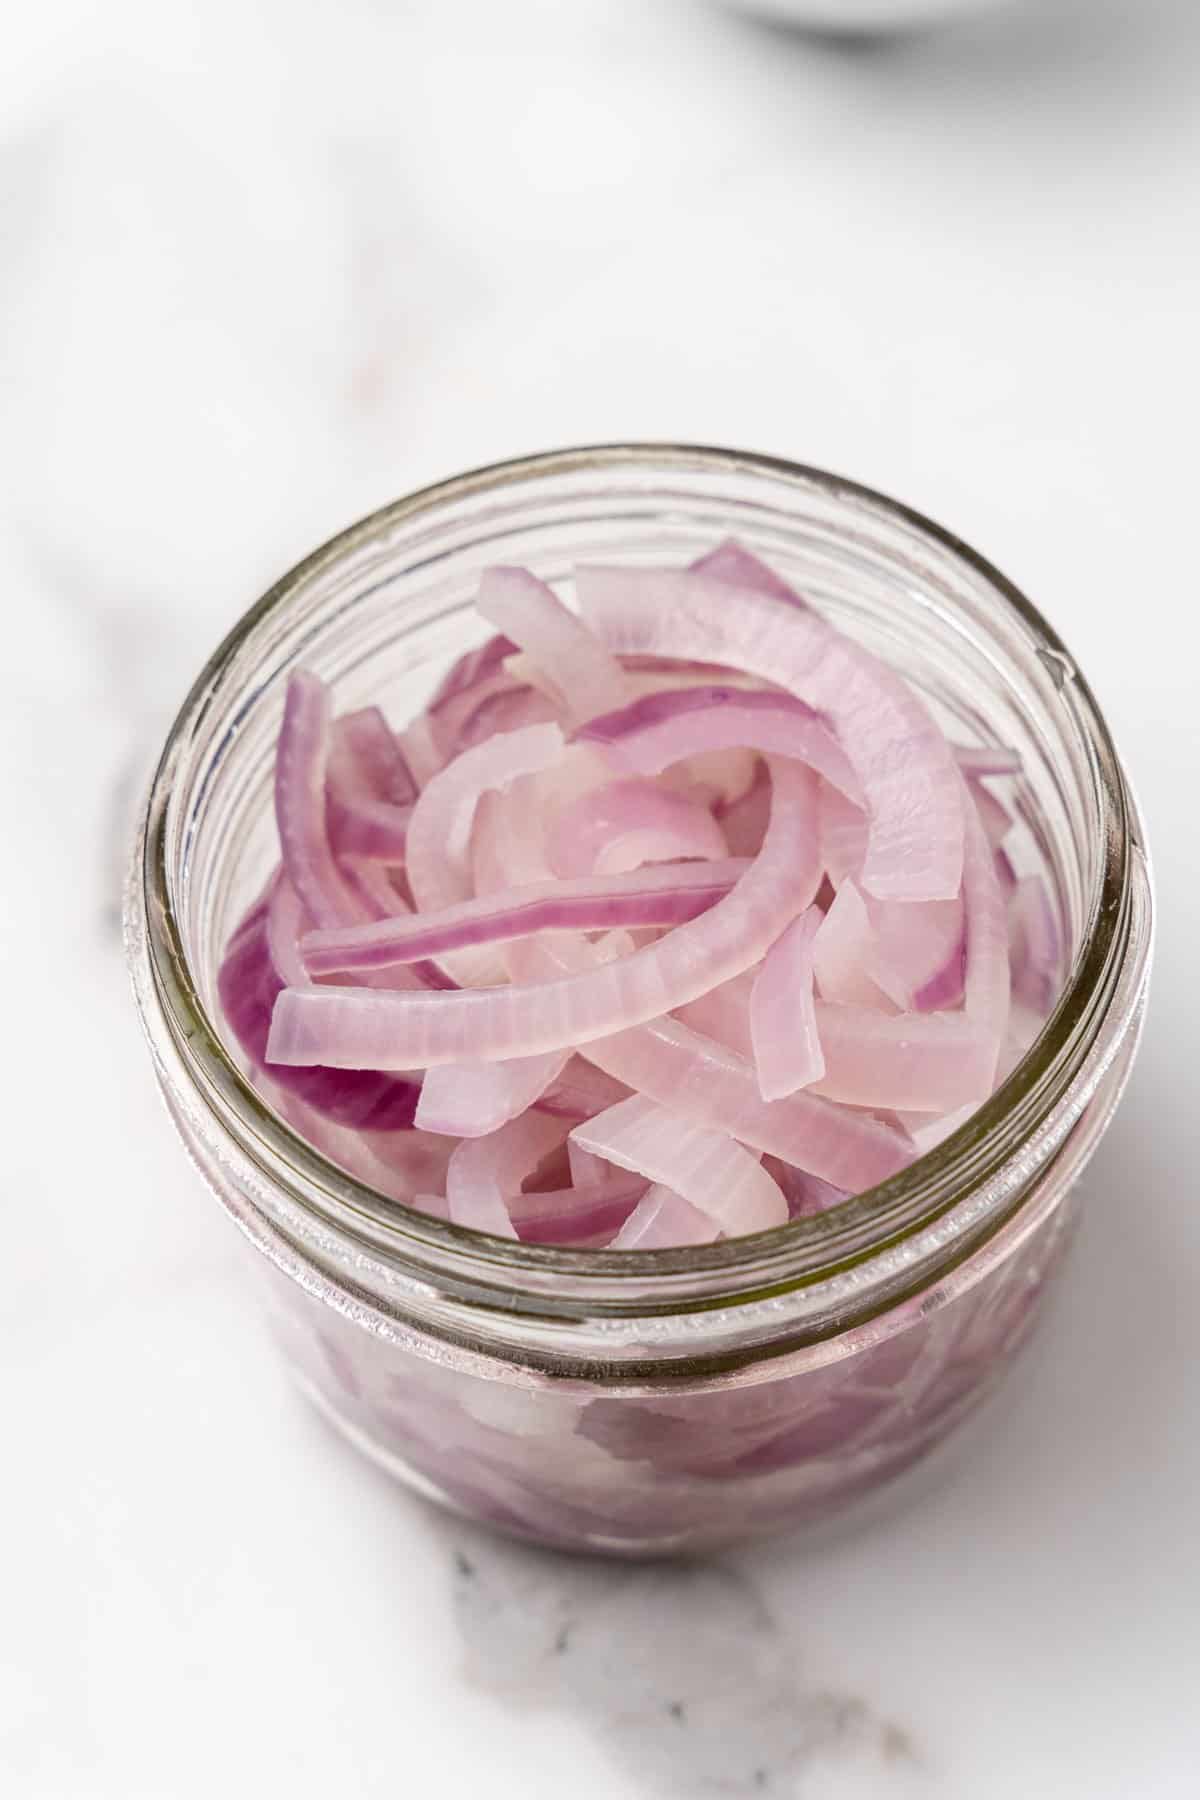 Boiled red onion slices in a glass jar on a white marble surface